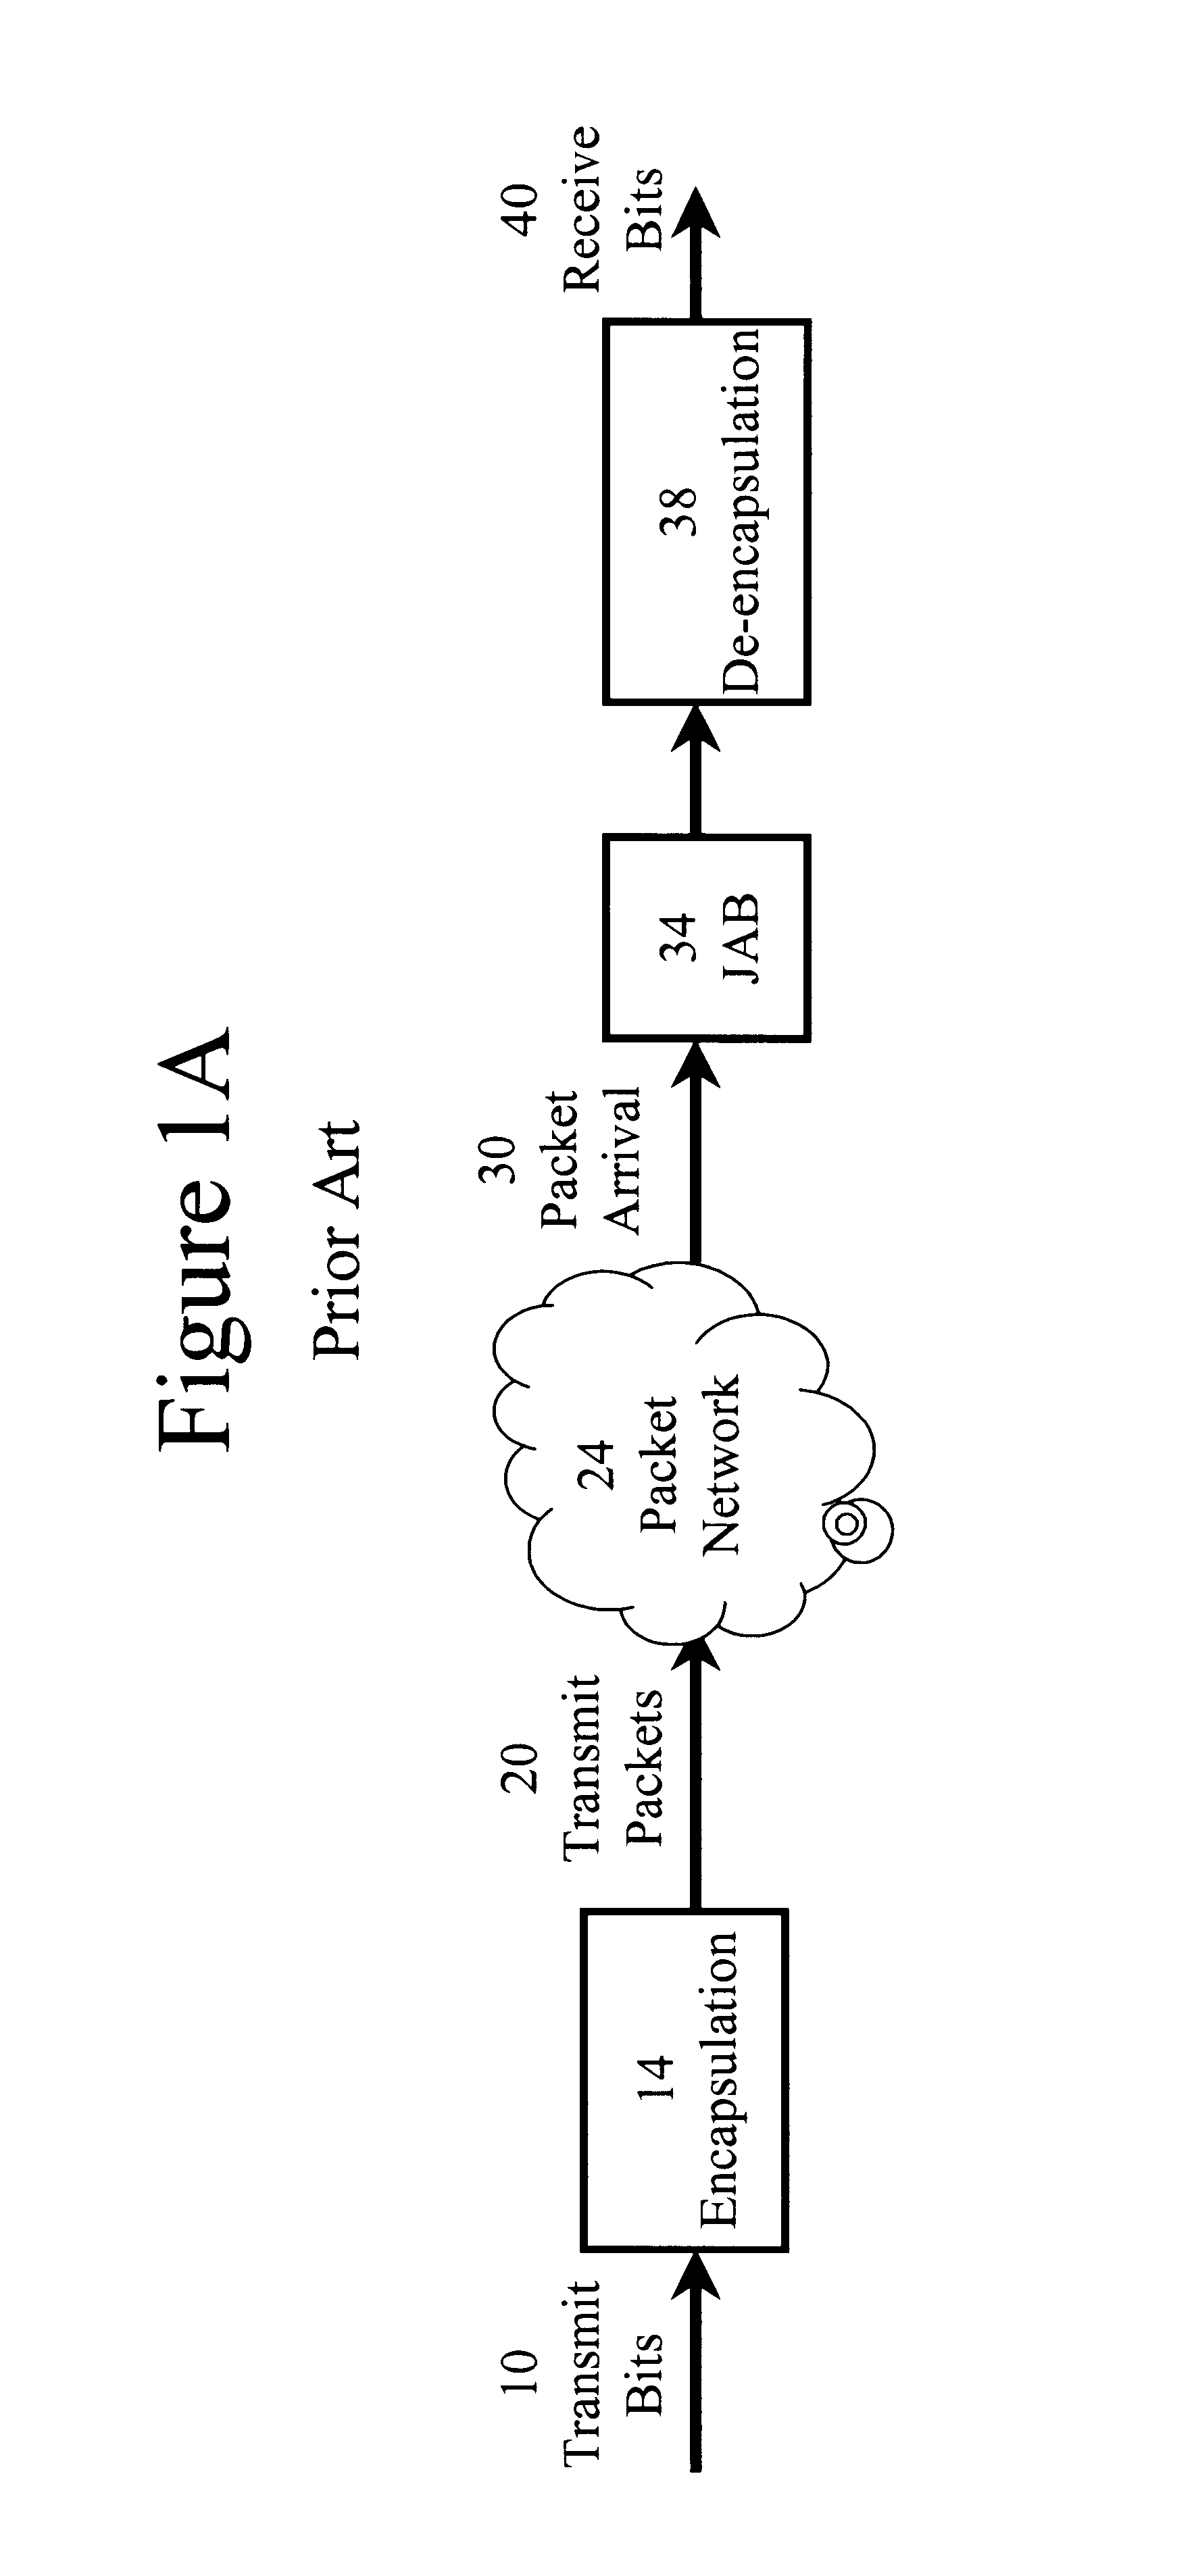 Automatic adjustment of buffer depth for the correction of packet delay variation